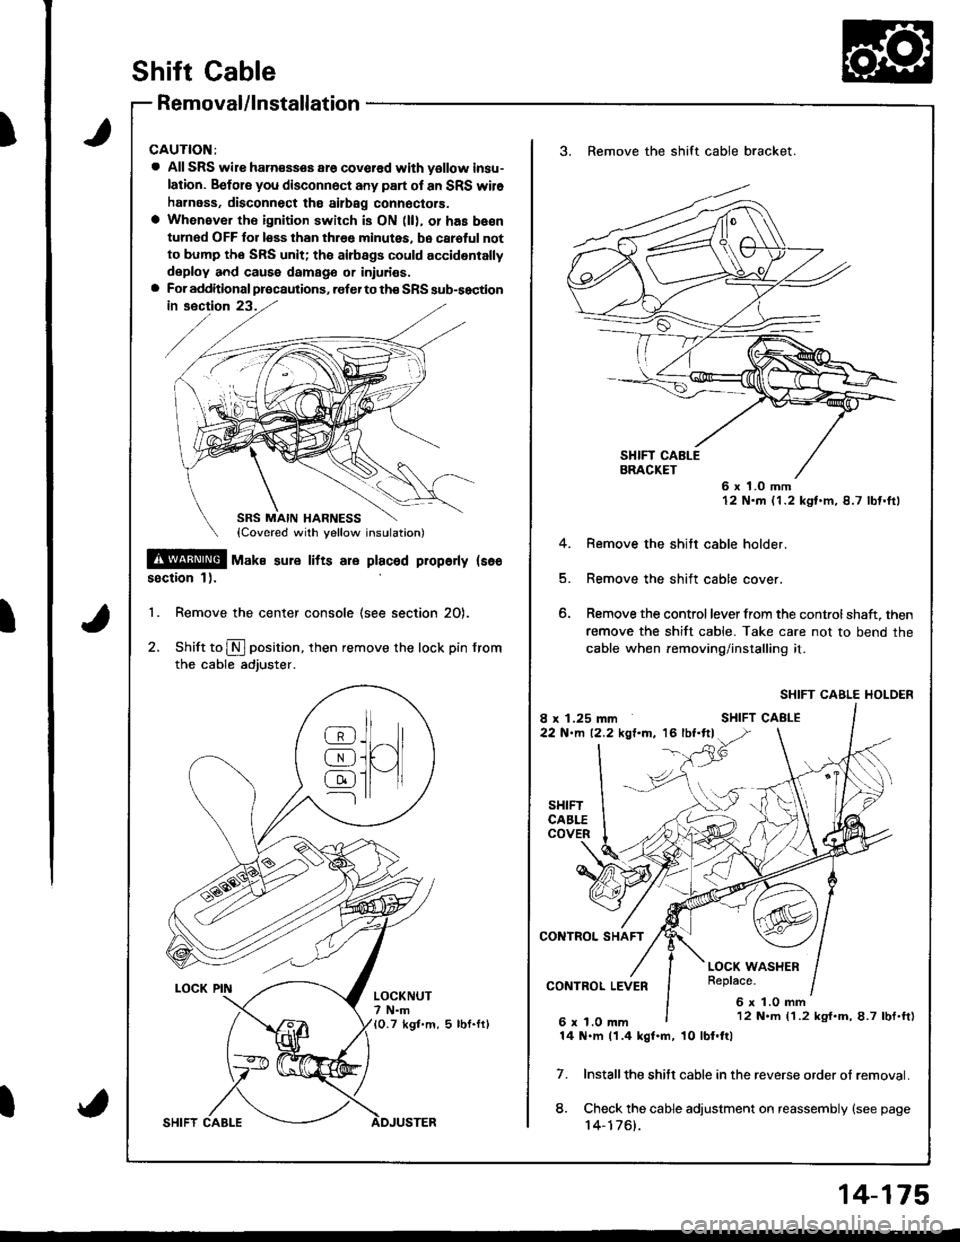 HONDA INTEGRA 1998 4.G Workshop Manual )
I
t
Shift Cable
Removal/lnstallation
CAUTION:
a All SRS wile ham€sses ar6 covcred with yollow insu-
lation. Befols you disconnect any part of an SRS wil6
harness, disconnect tho ailbag connoctors.